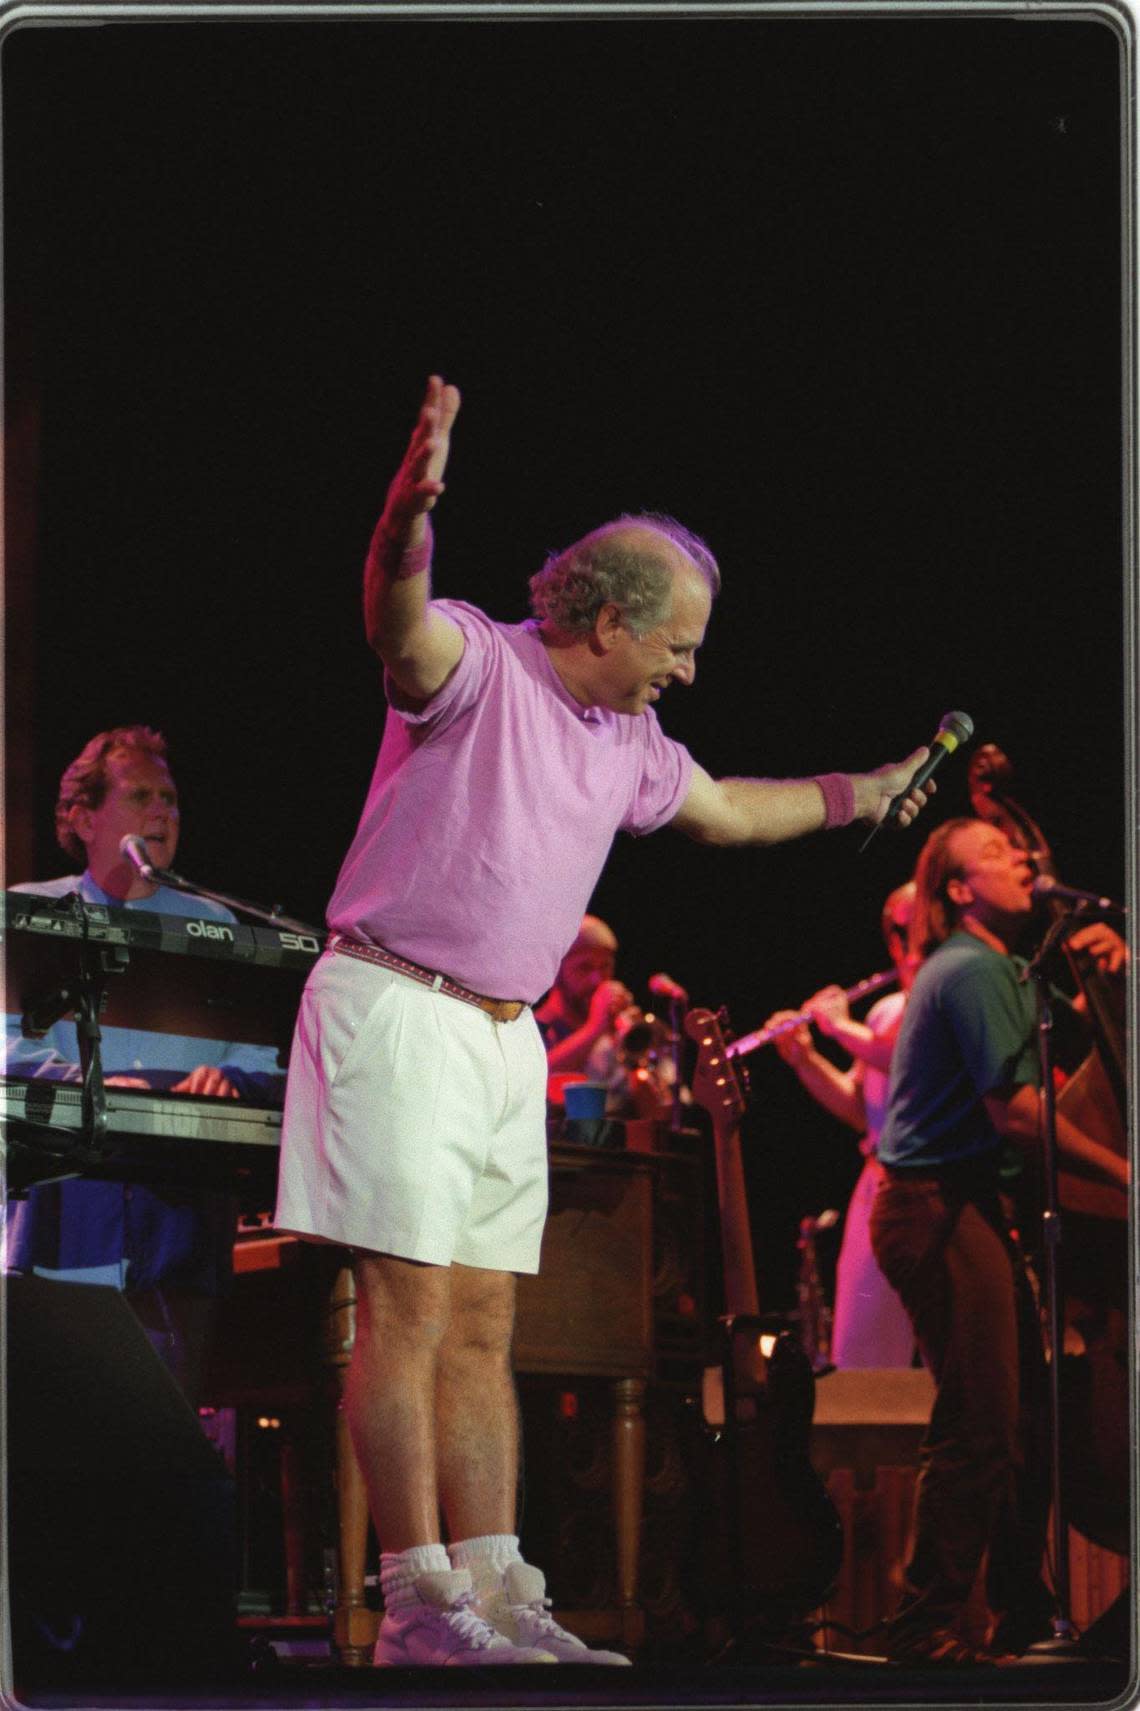 Jimmy Buffett in concert at the then Coral Sky Amphitheater in West Palm Beach in Feb 1997.